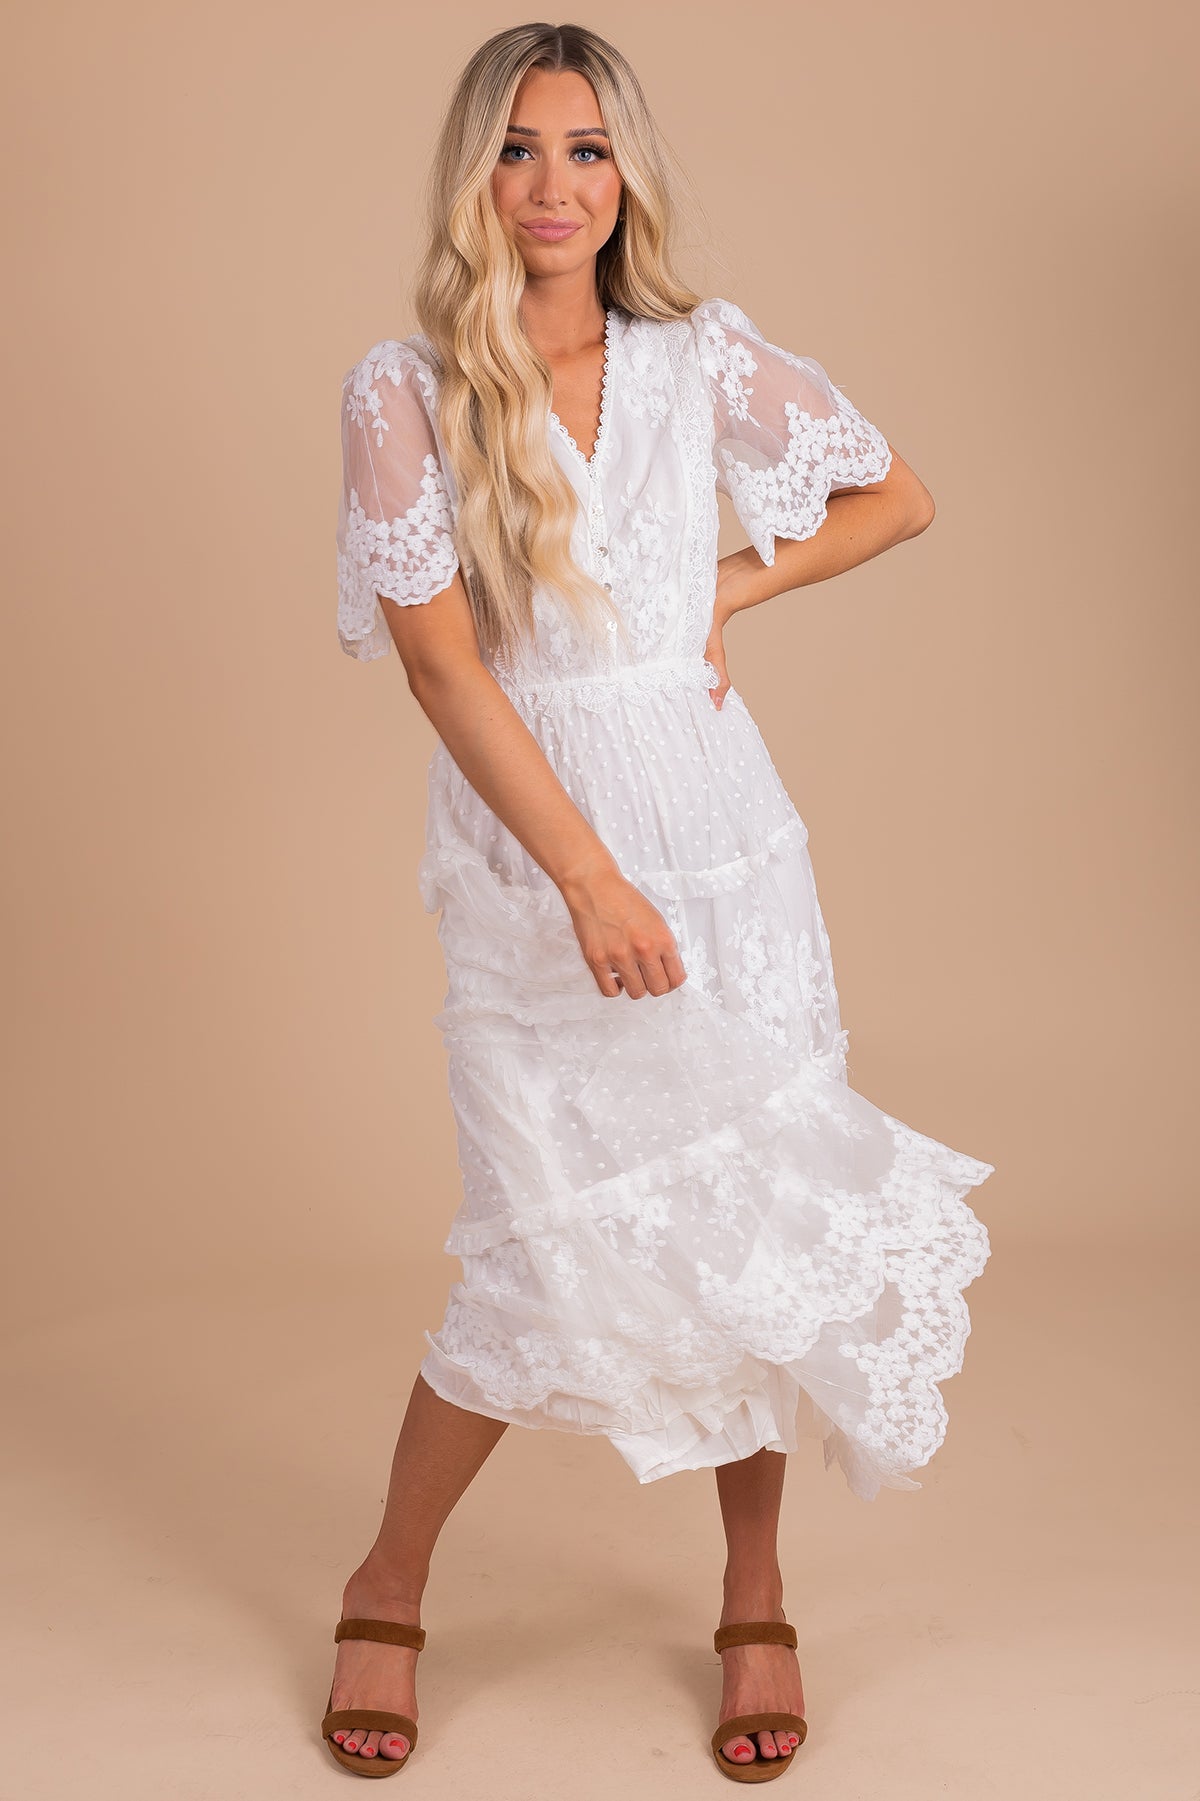 Women's White Dress with Lace and V Neckline.